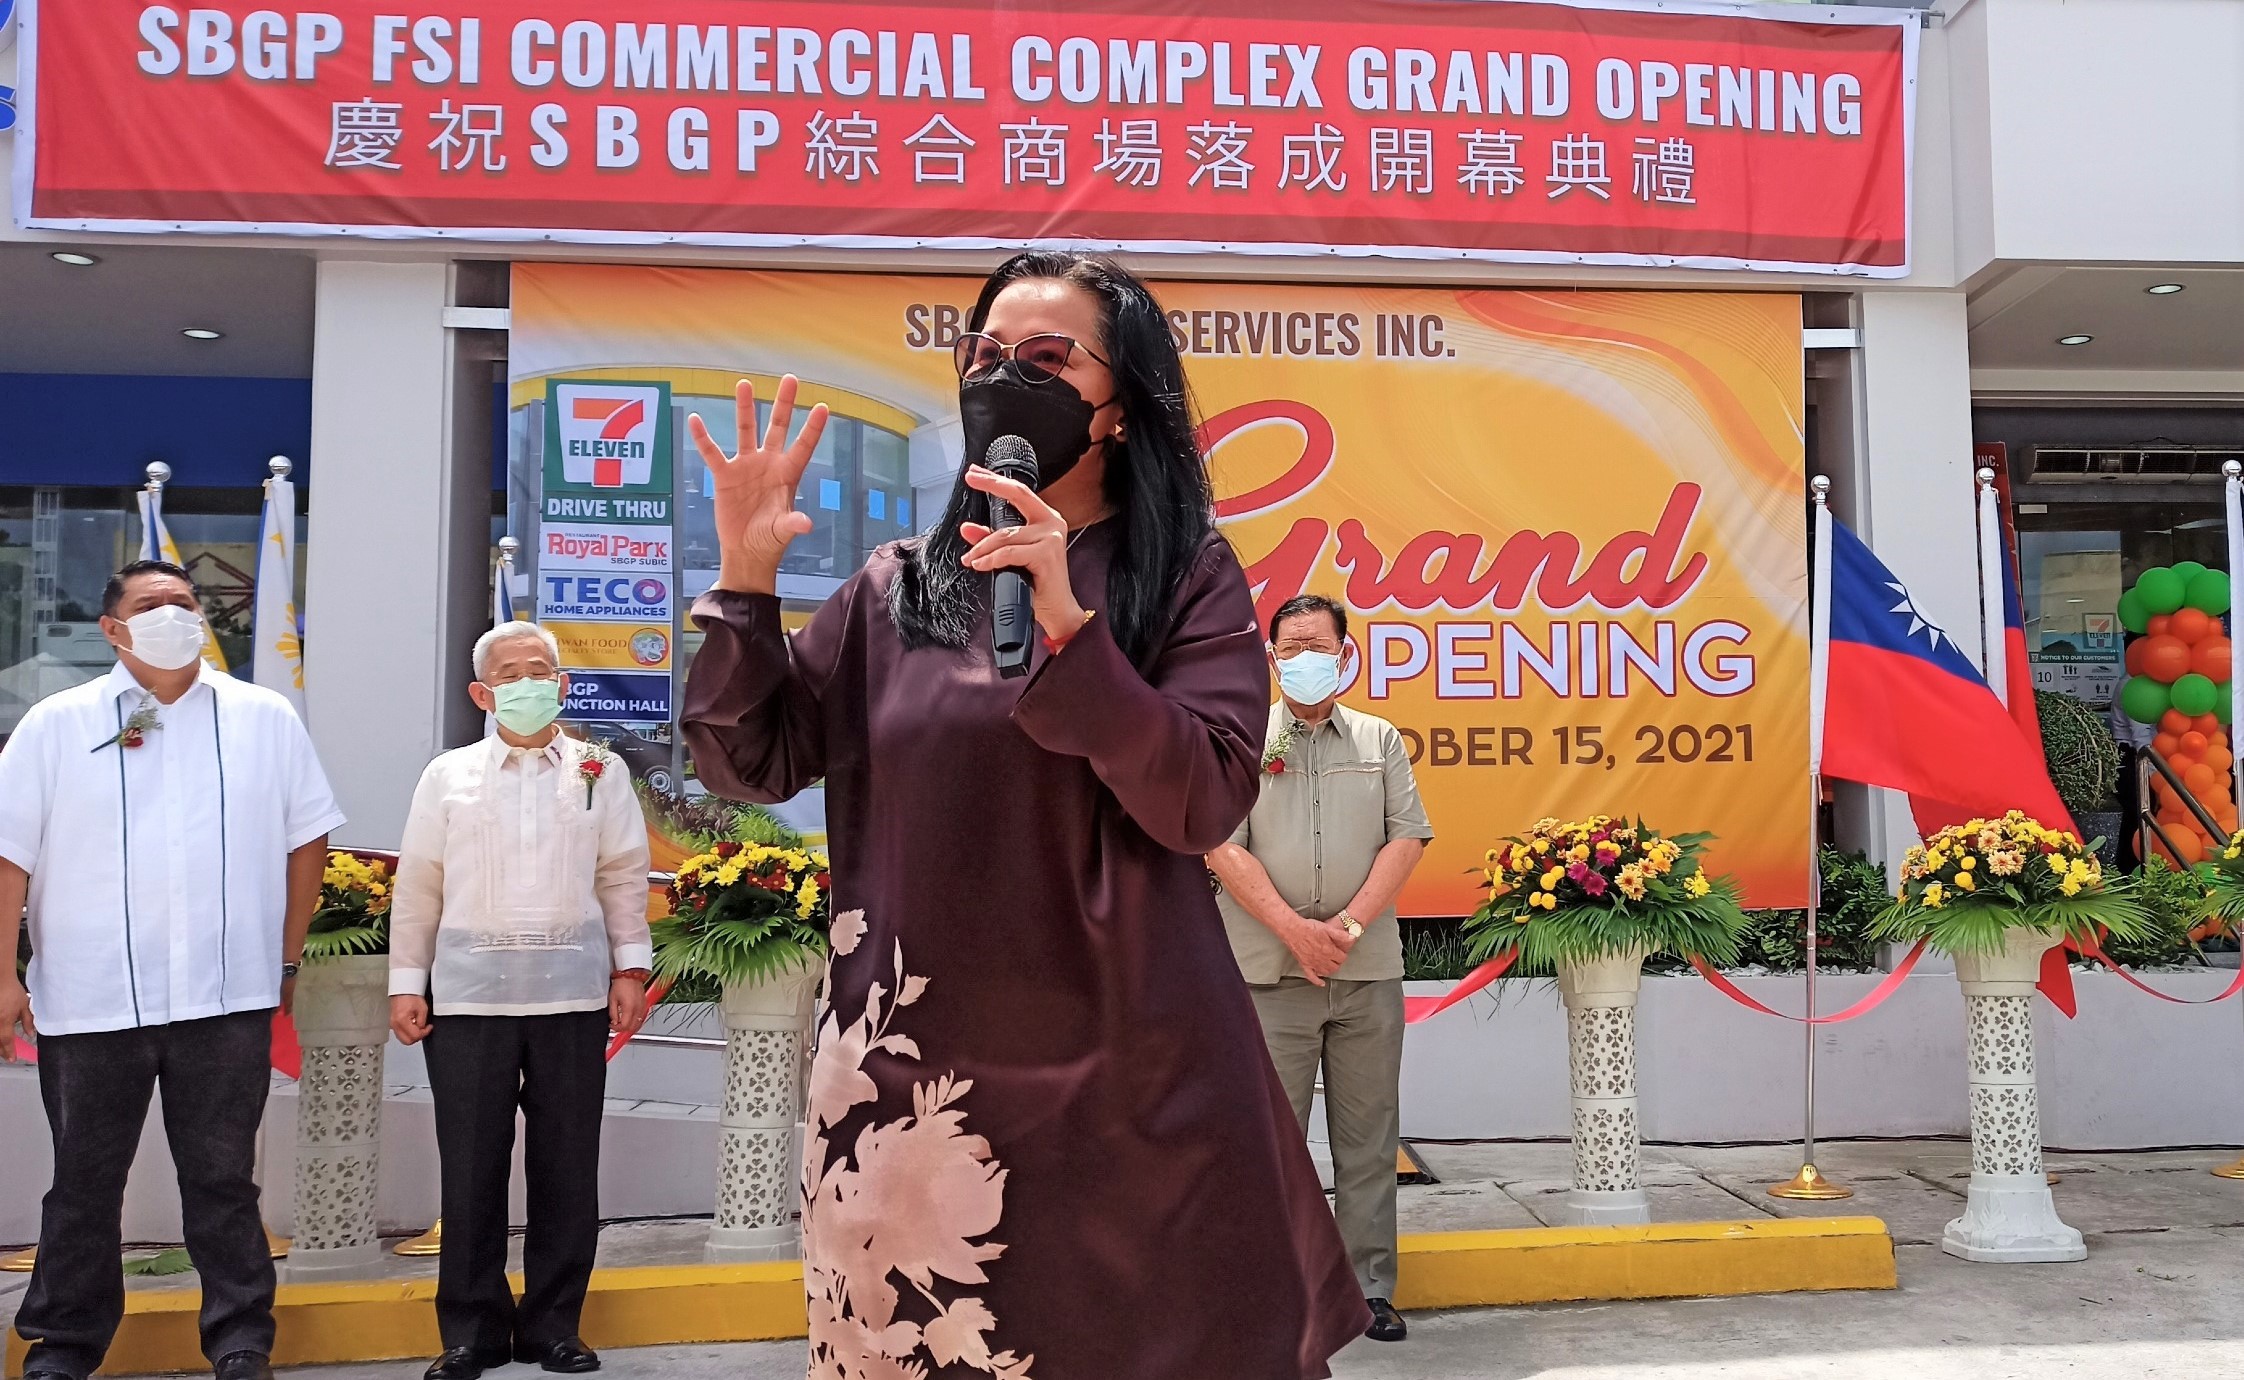 SBMA Chairman and Administrator Wilma T. Eisma thanks investors during the inauguration in October of the SBGP-FSI Commercial Complex, one of the biggest investment projects in Subic this year.